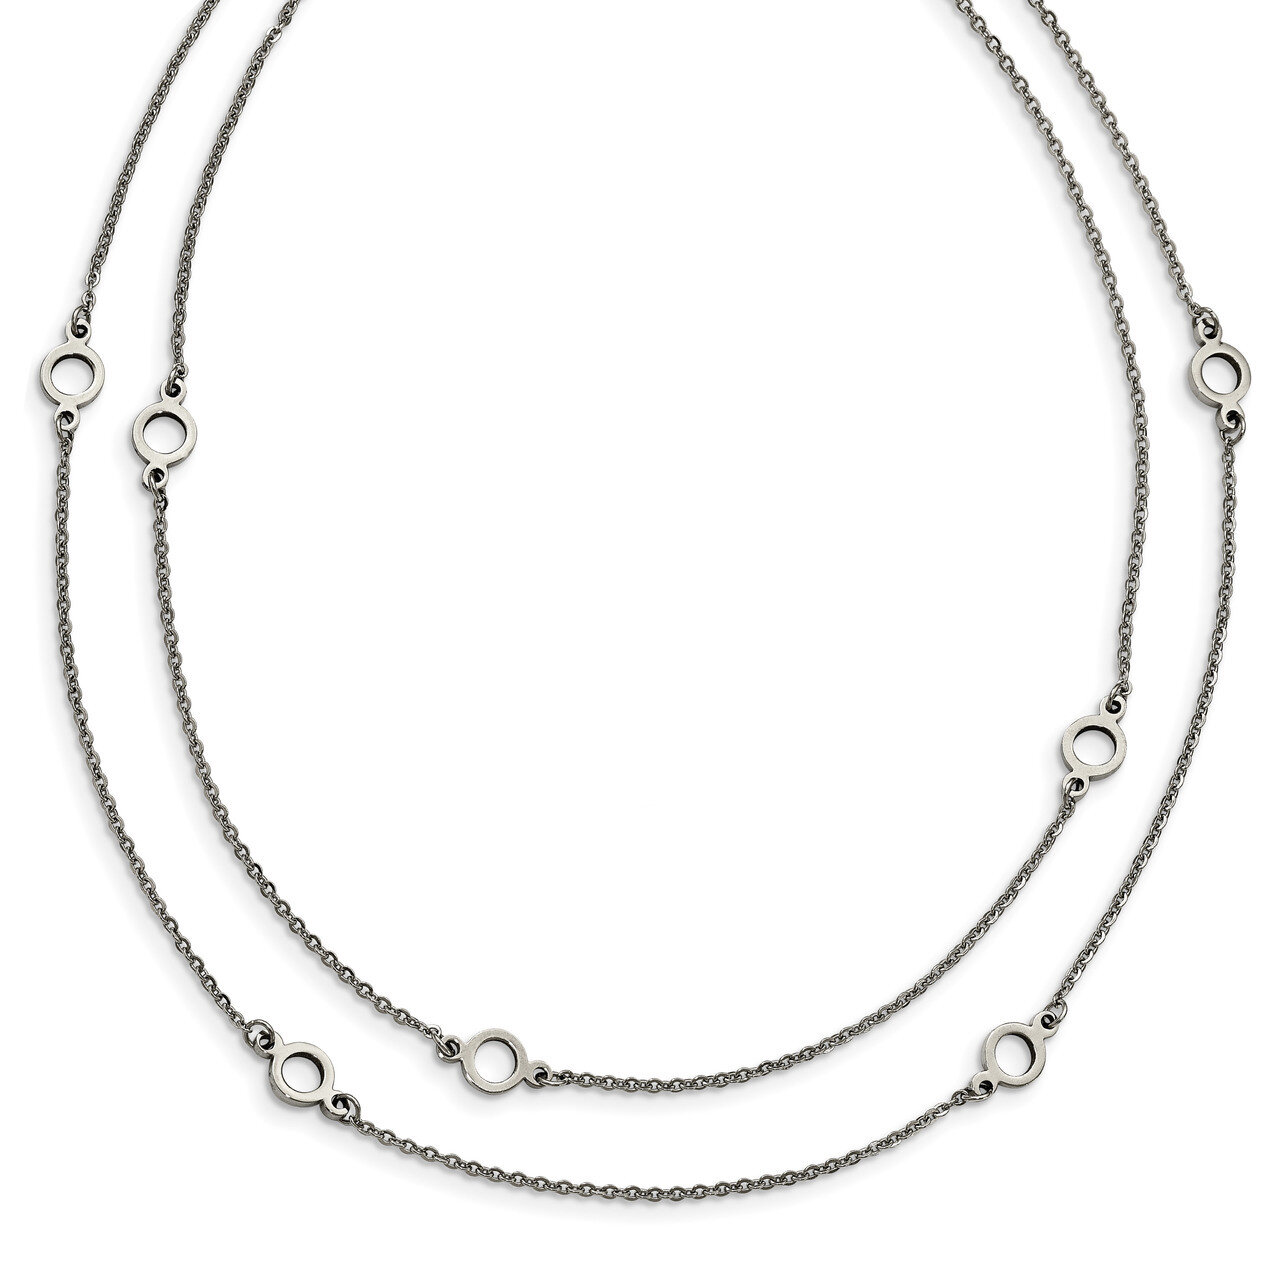 Two Strand with 2 Inch Extender Necklace Stainless Steel SRN1869-15.75